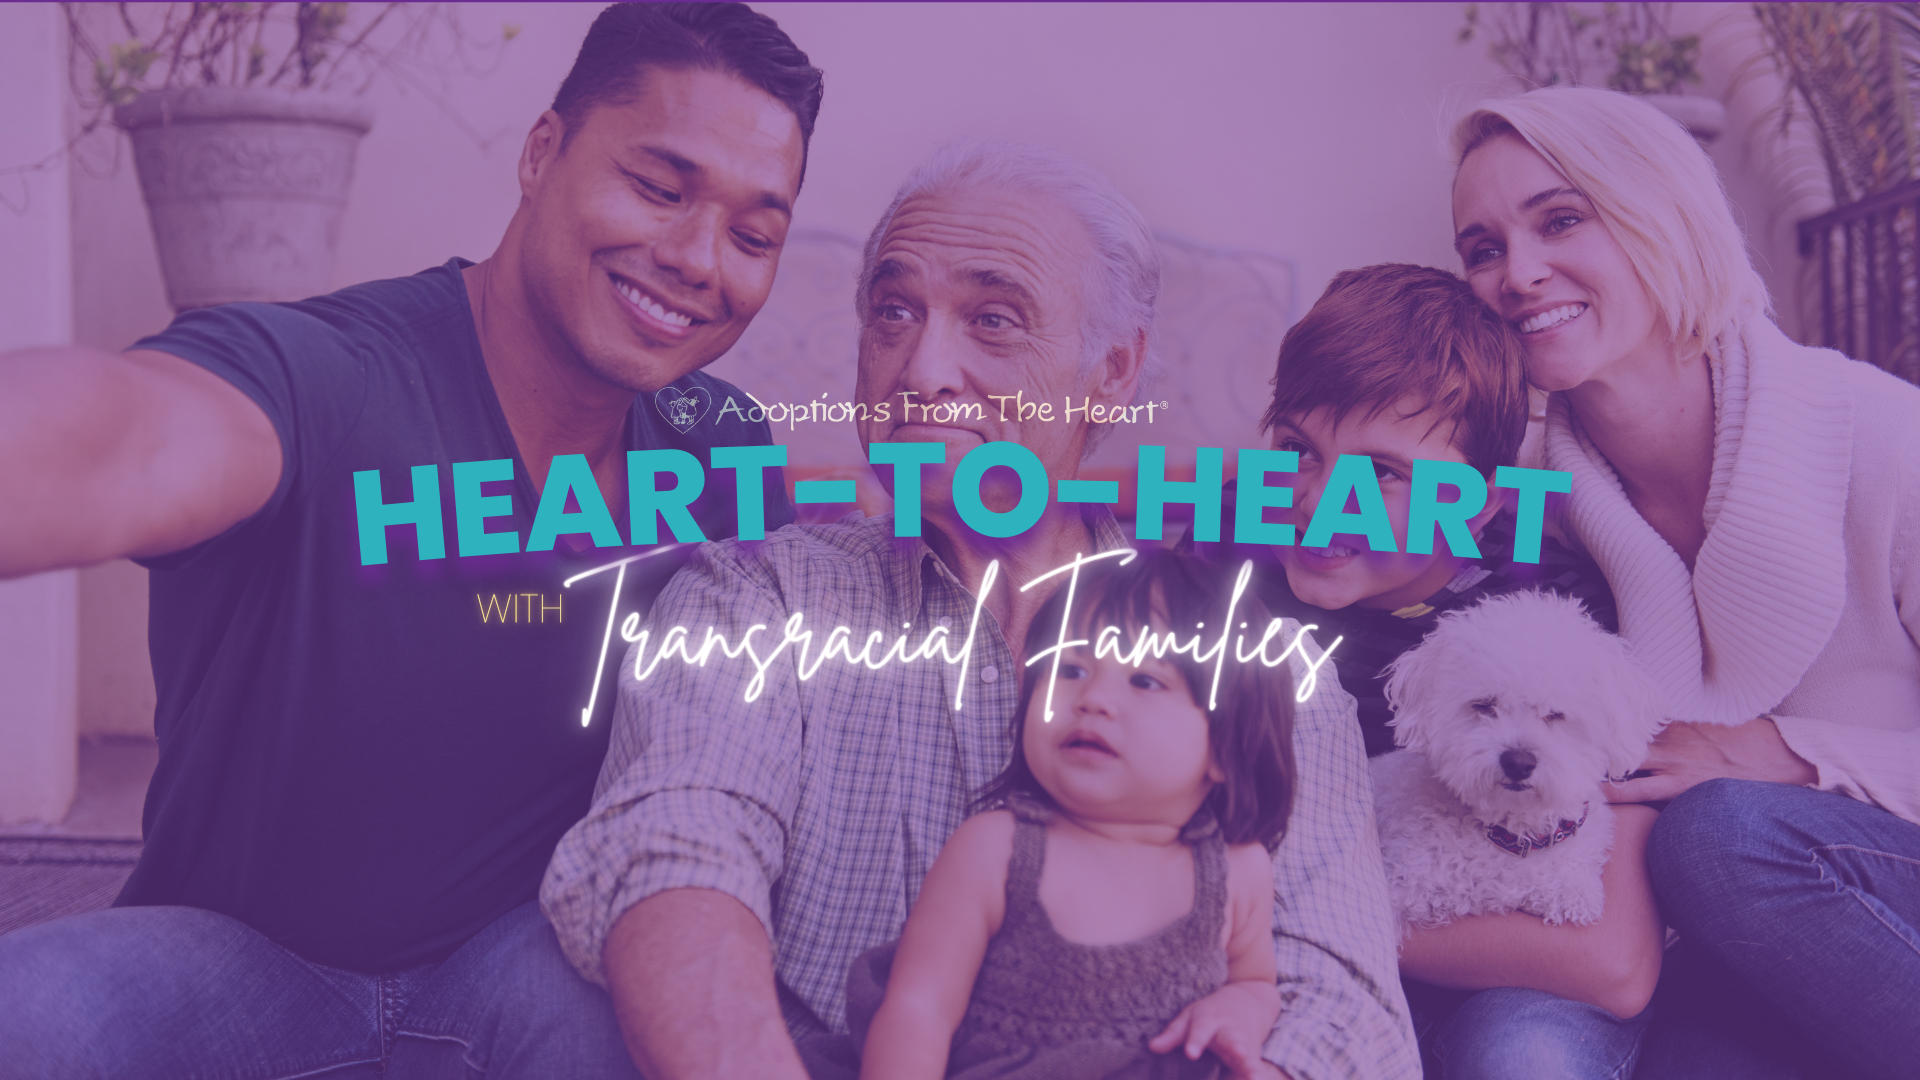 Transracial Adoption | Join The Conversation at Next Month’s Heart To Heart